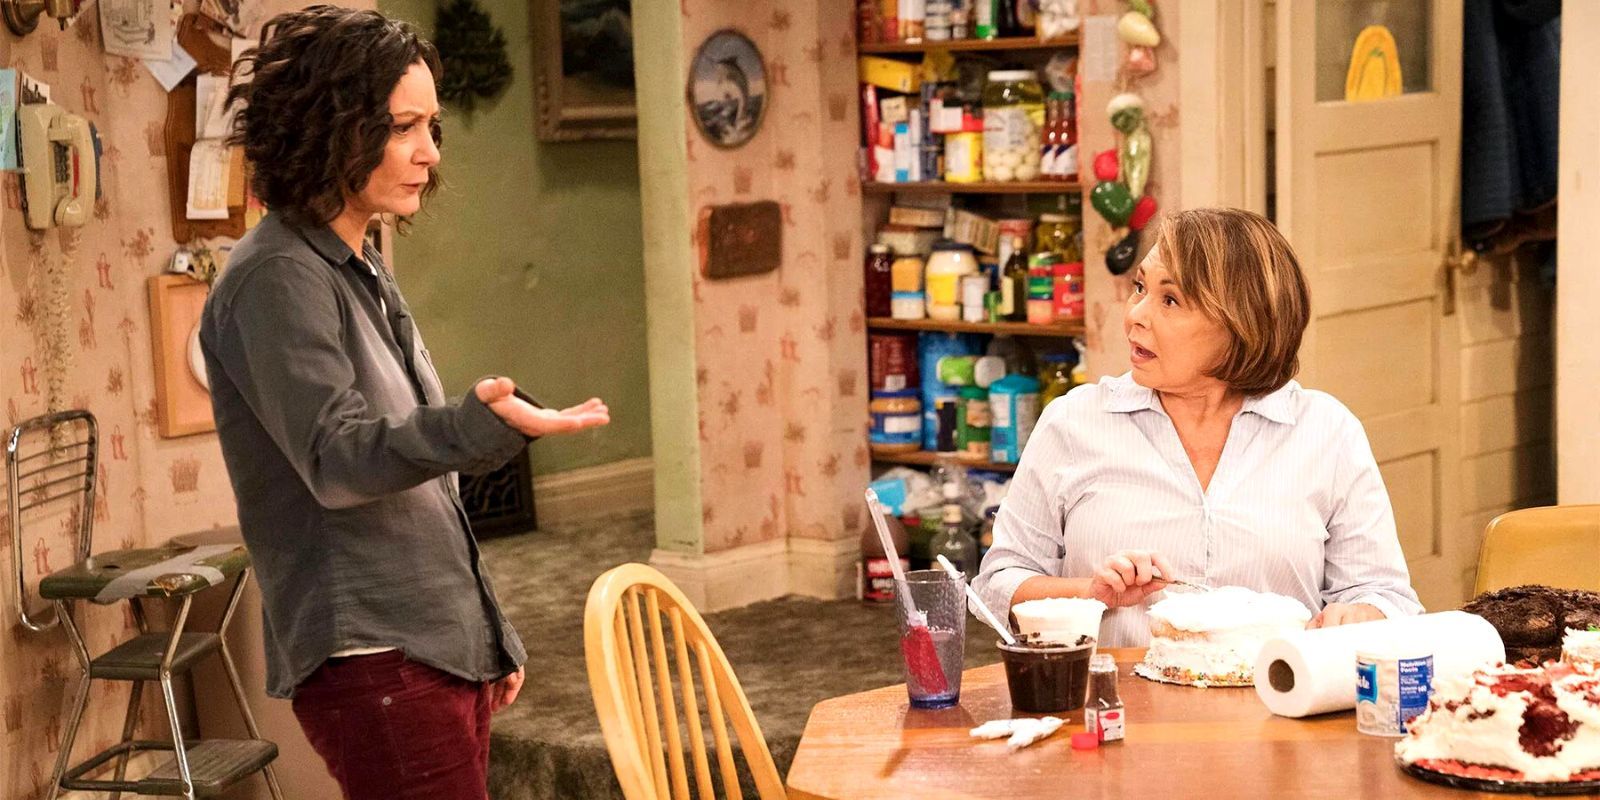 Sara Gilbert and Roseanne Barr standing in a kitchen having a discussion